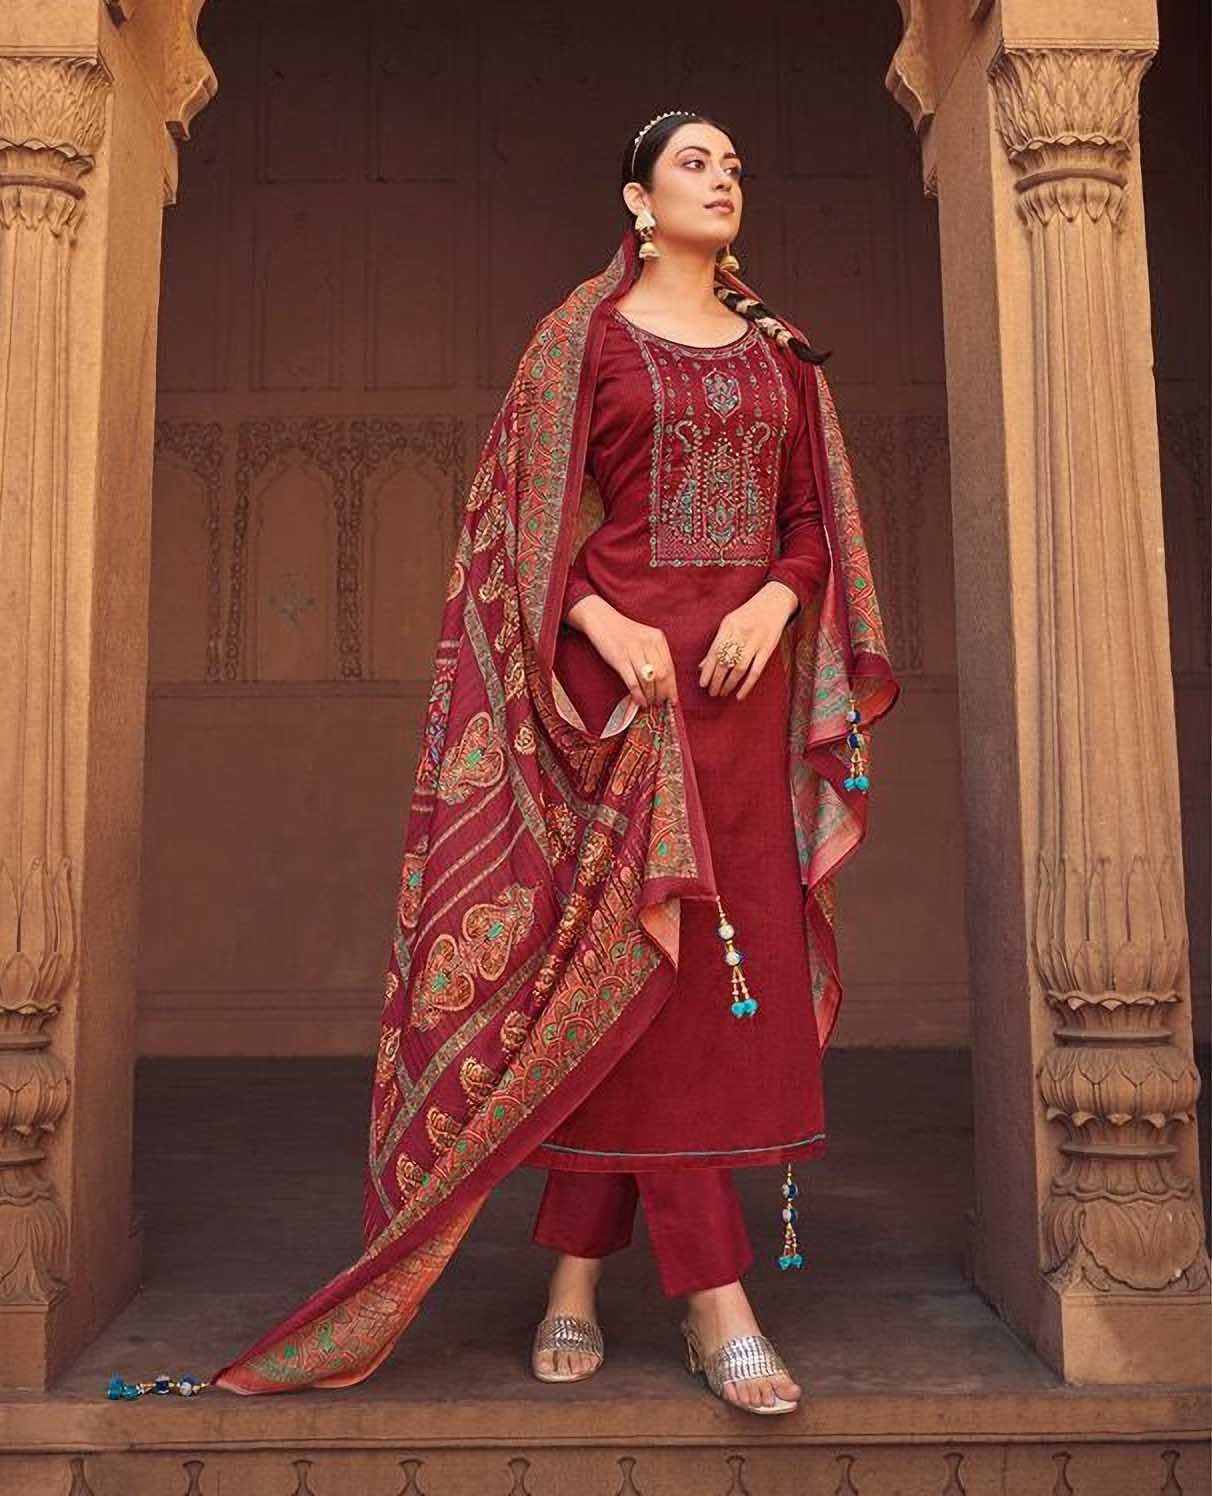 Unstitched Maroon Jam Satin Printed Dress Material With Embroidery - Stilento